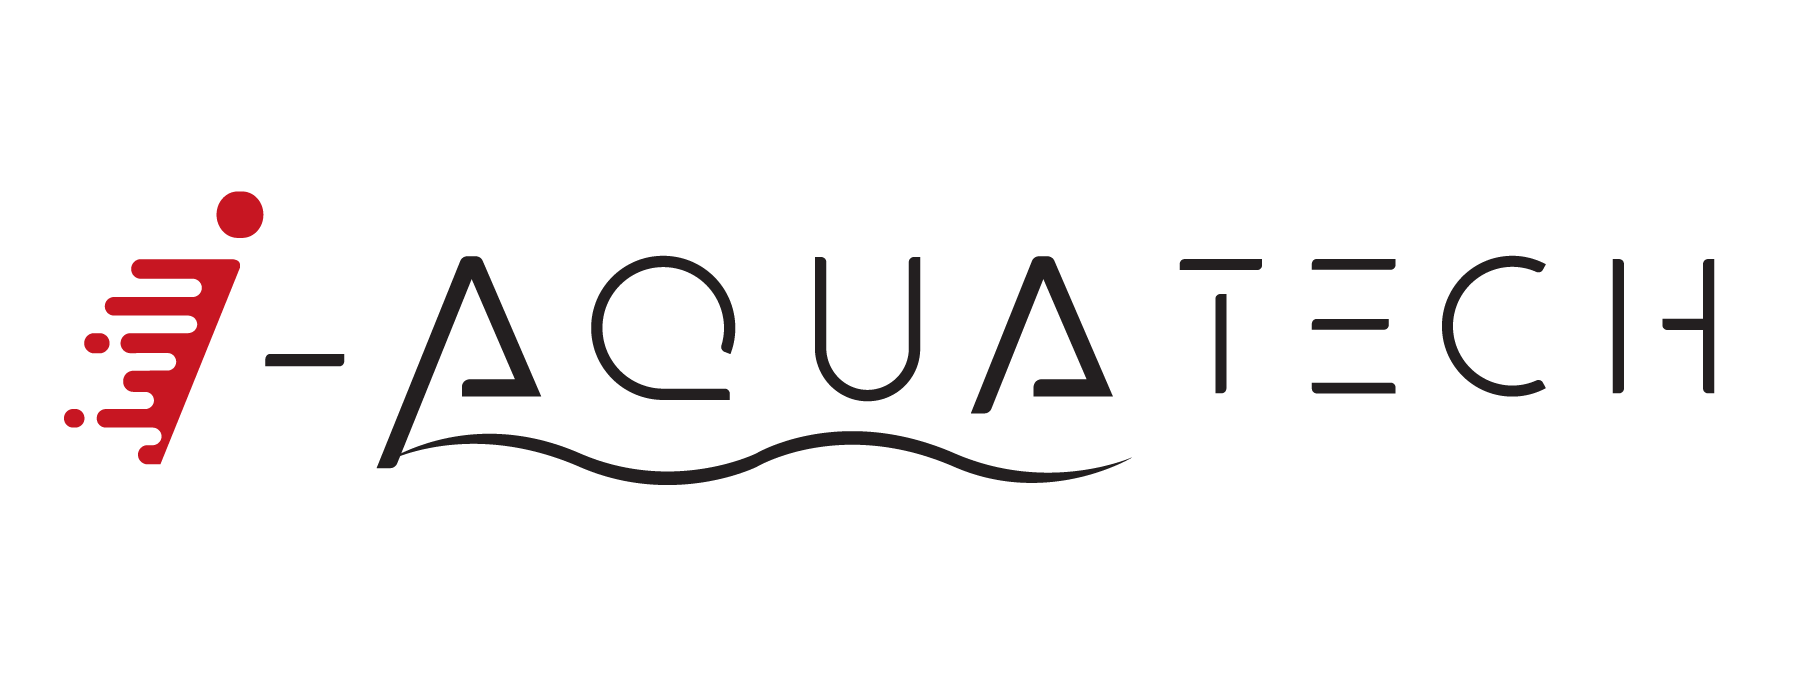 Powered by i-Aquatech Technology